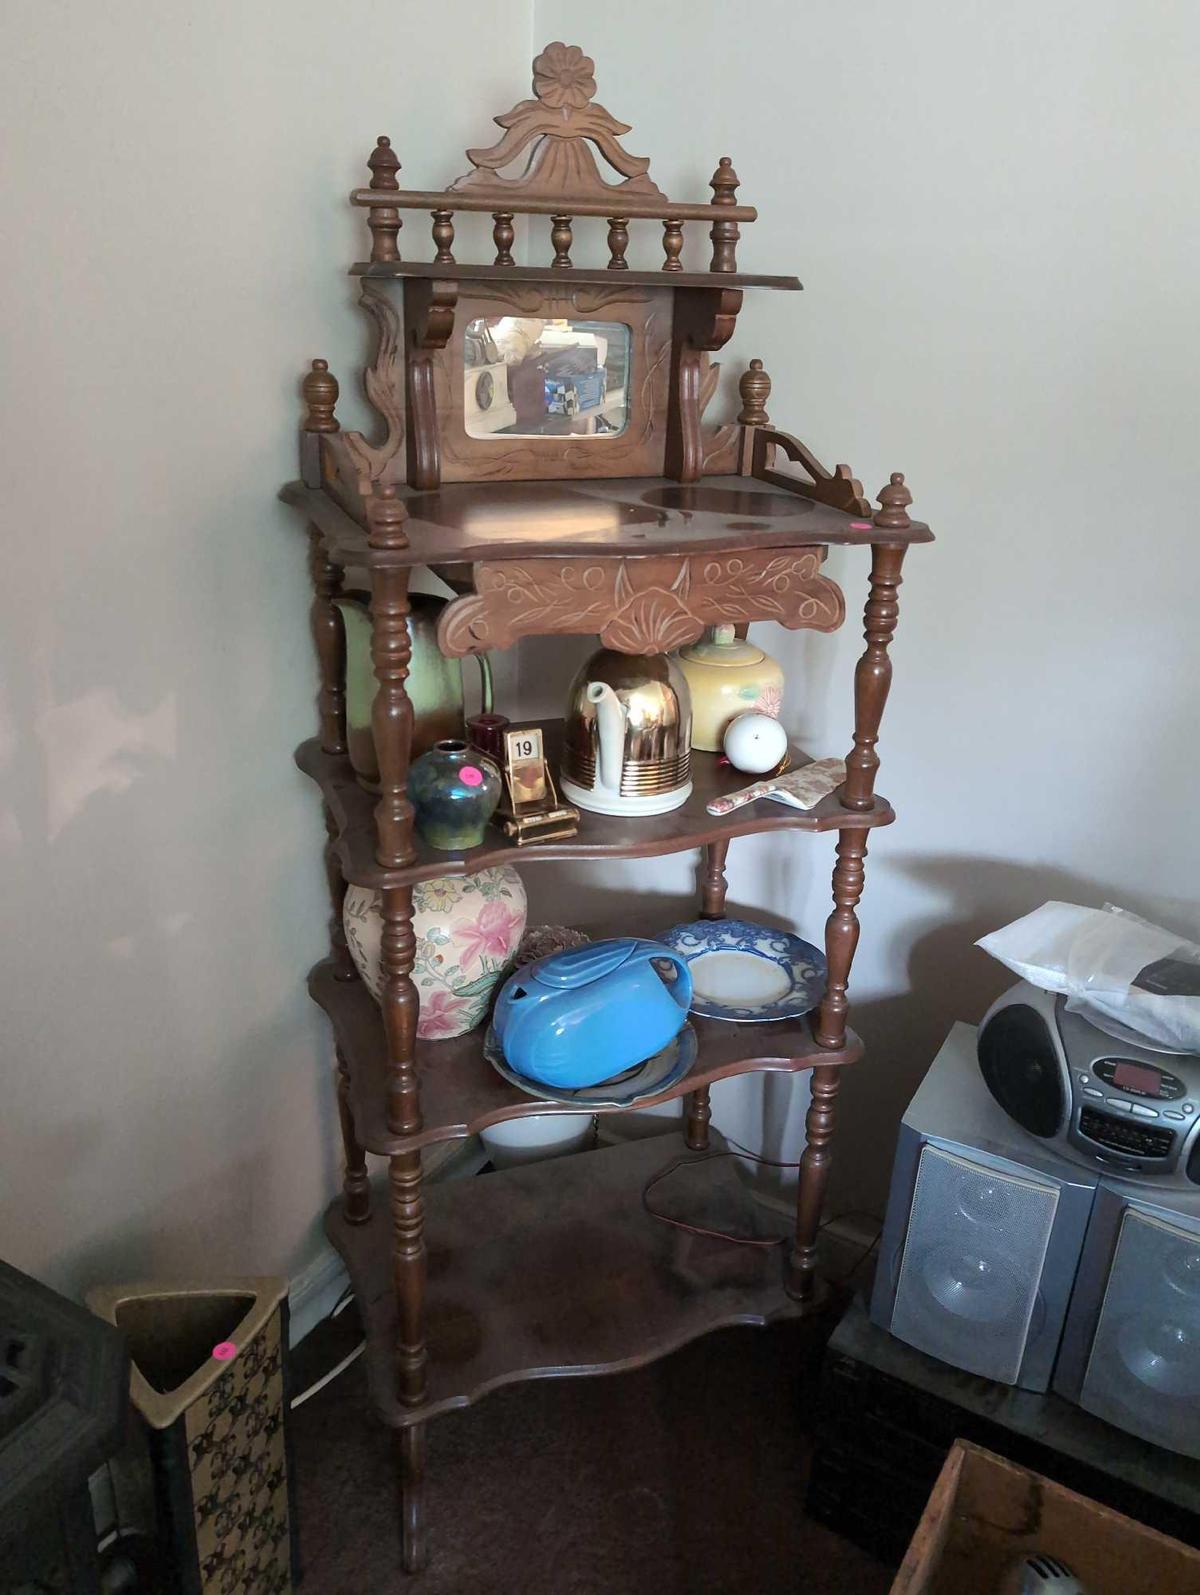 (LR) VINTAGE MIRRORED ETAGERE/WHATNOT SHELF WITH SINGLE FLORAL CARVED (DR)AWER, 4 SHELVES. IT